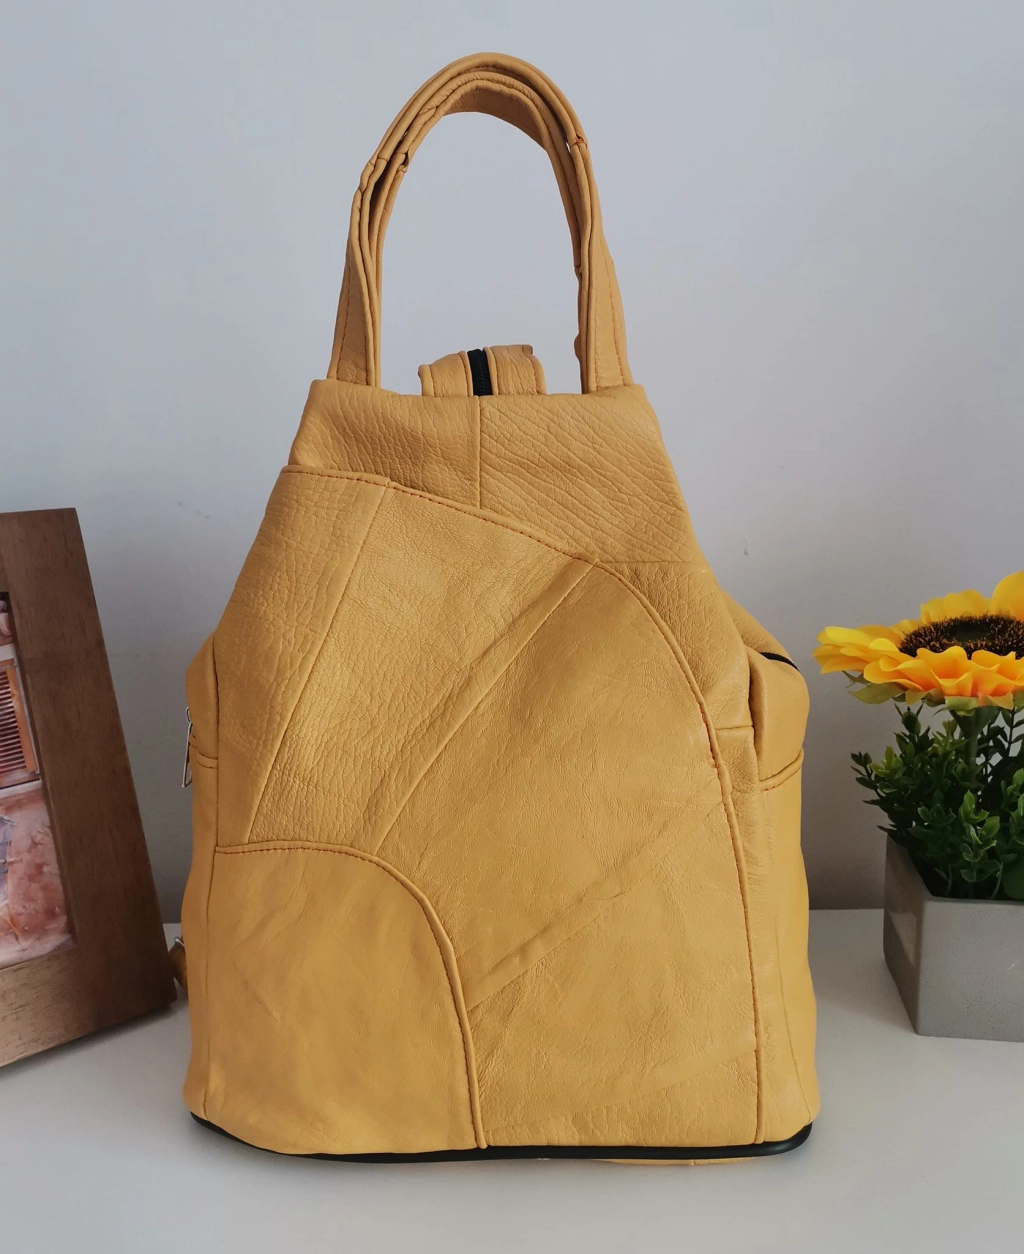 Genuine leather backpack with many pockets